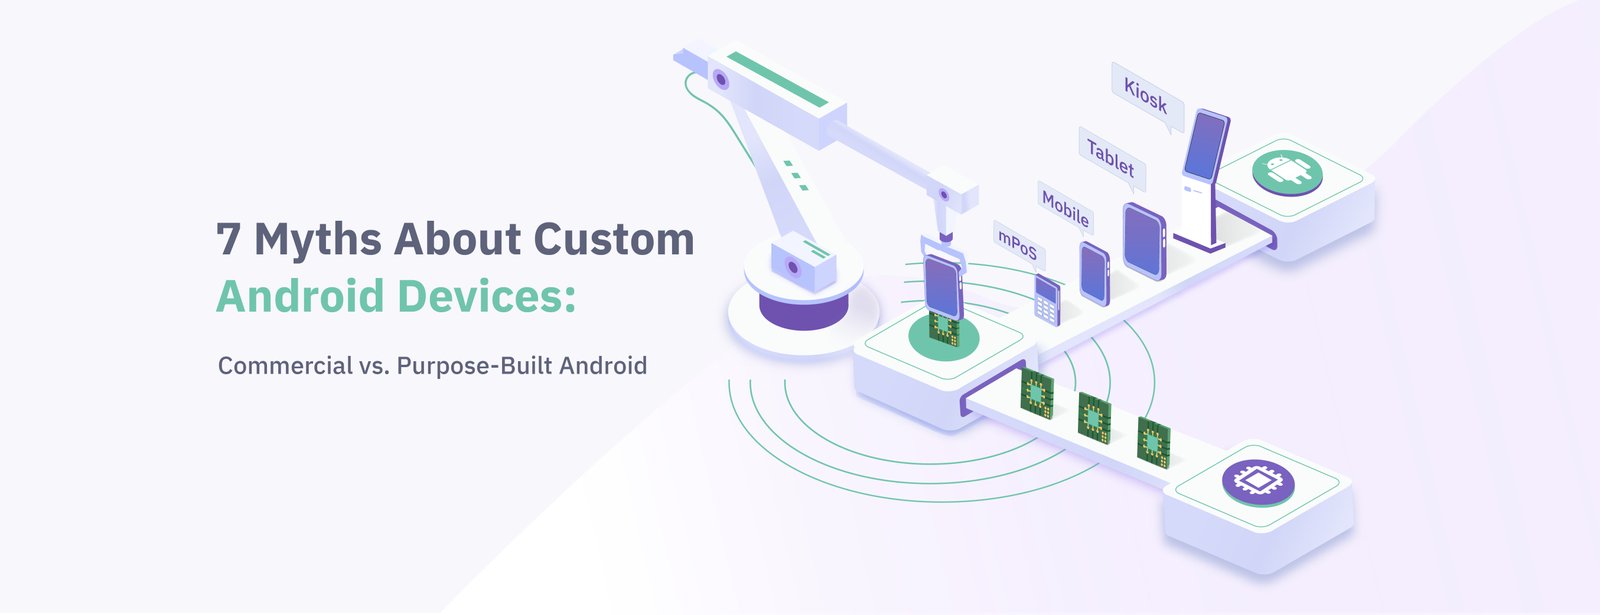 7 Myths About Custom Android Devices: Commercial vs. Purpose-Built